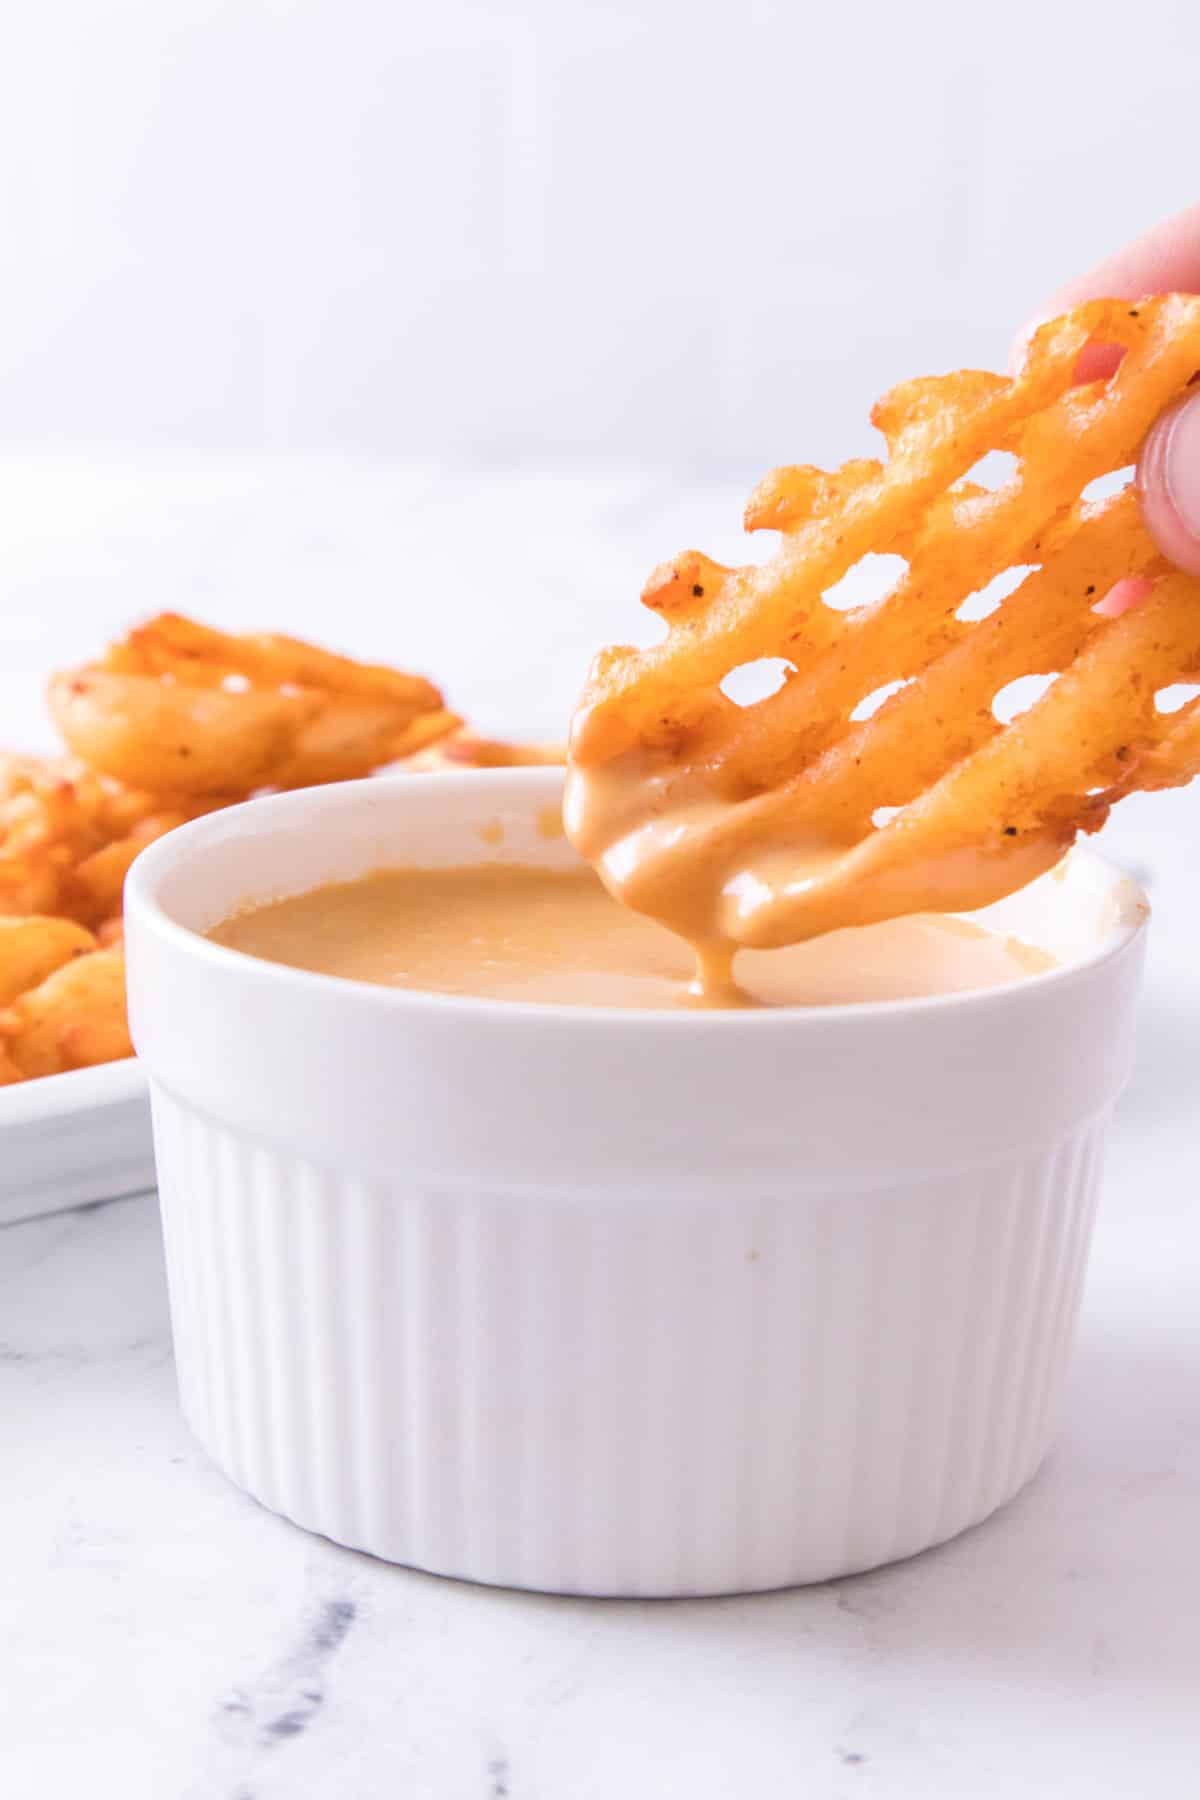 platter of waffle fries and a bowl of Chick-Fil-A dipping sauce.